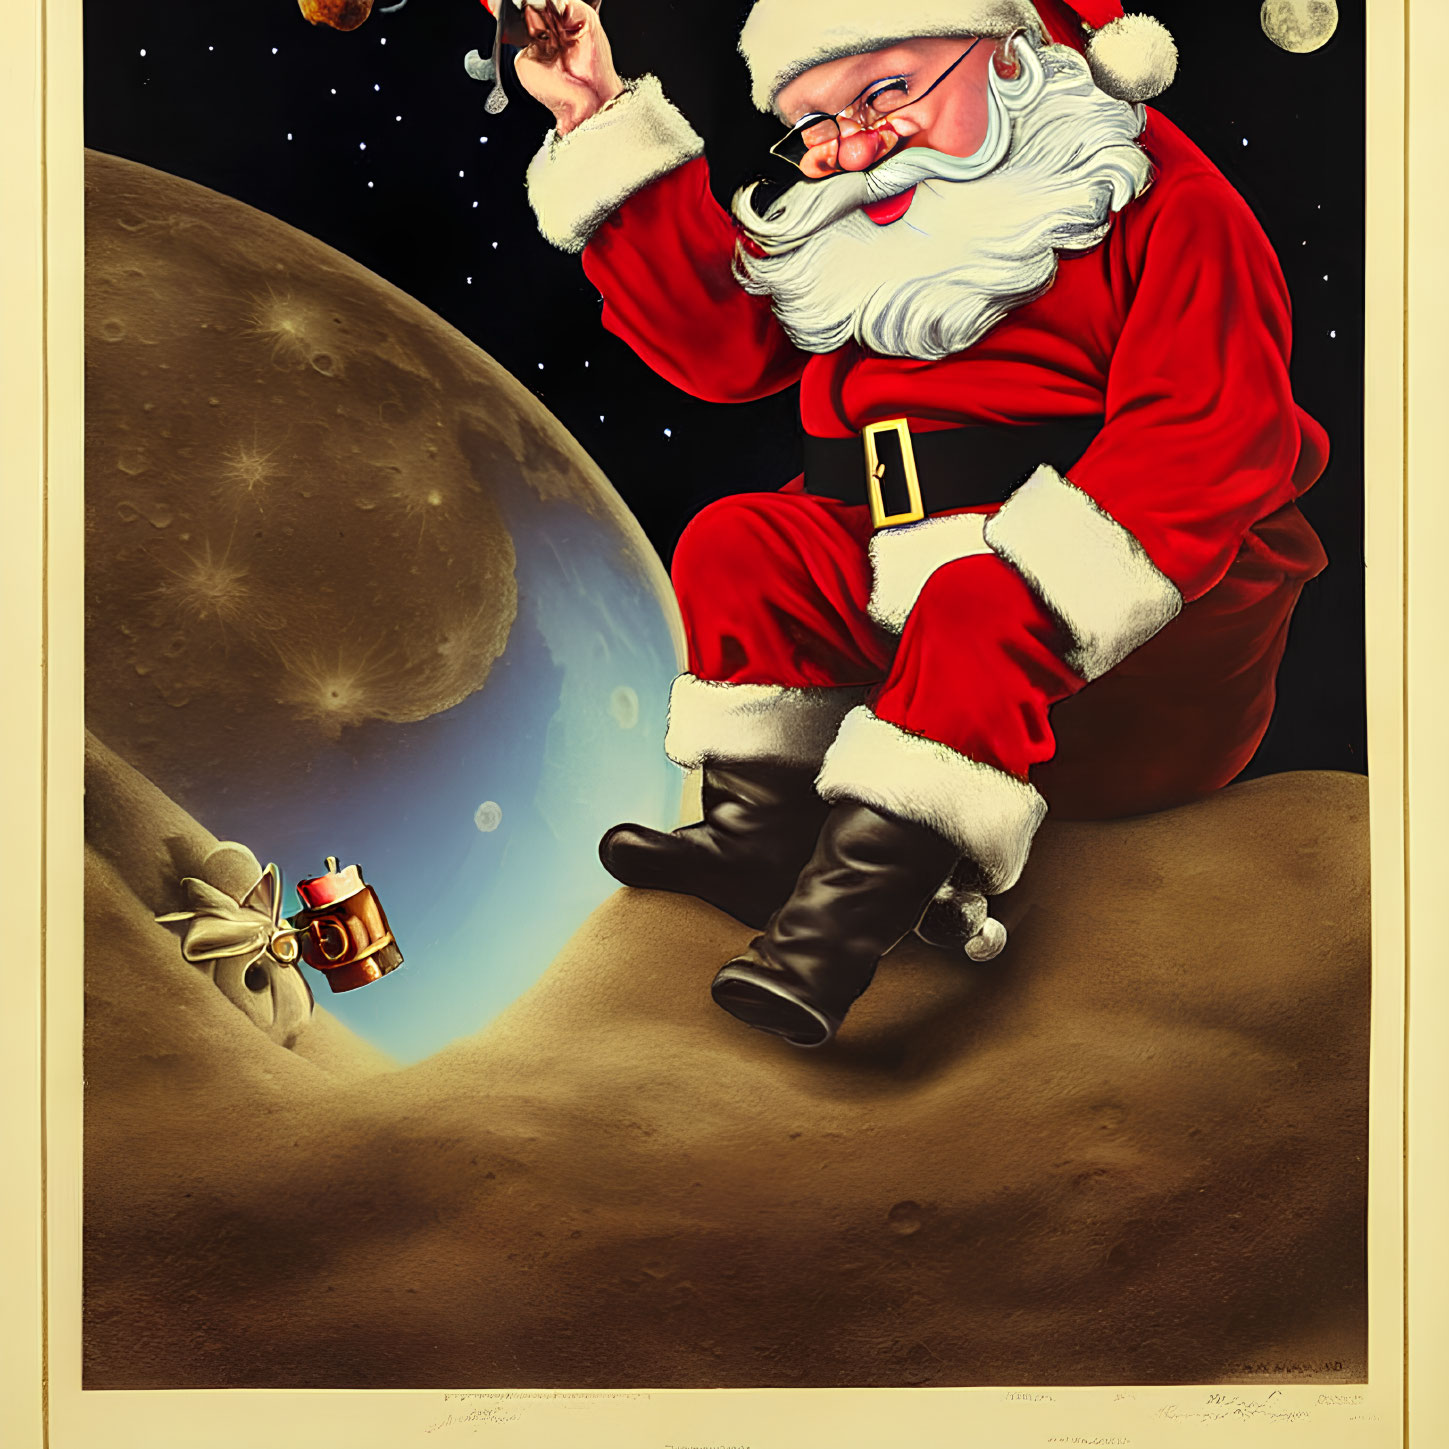 Santa Claus on Crescent Moon with Earth in Starry Night Sky